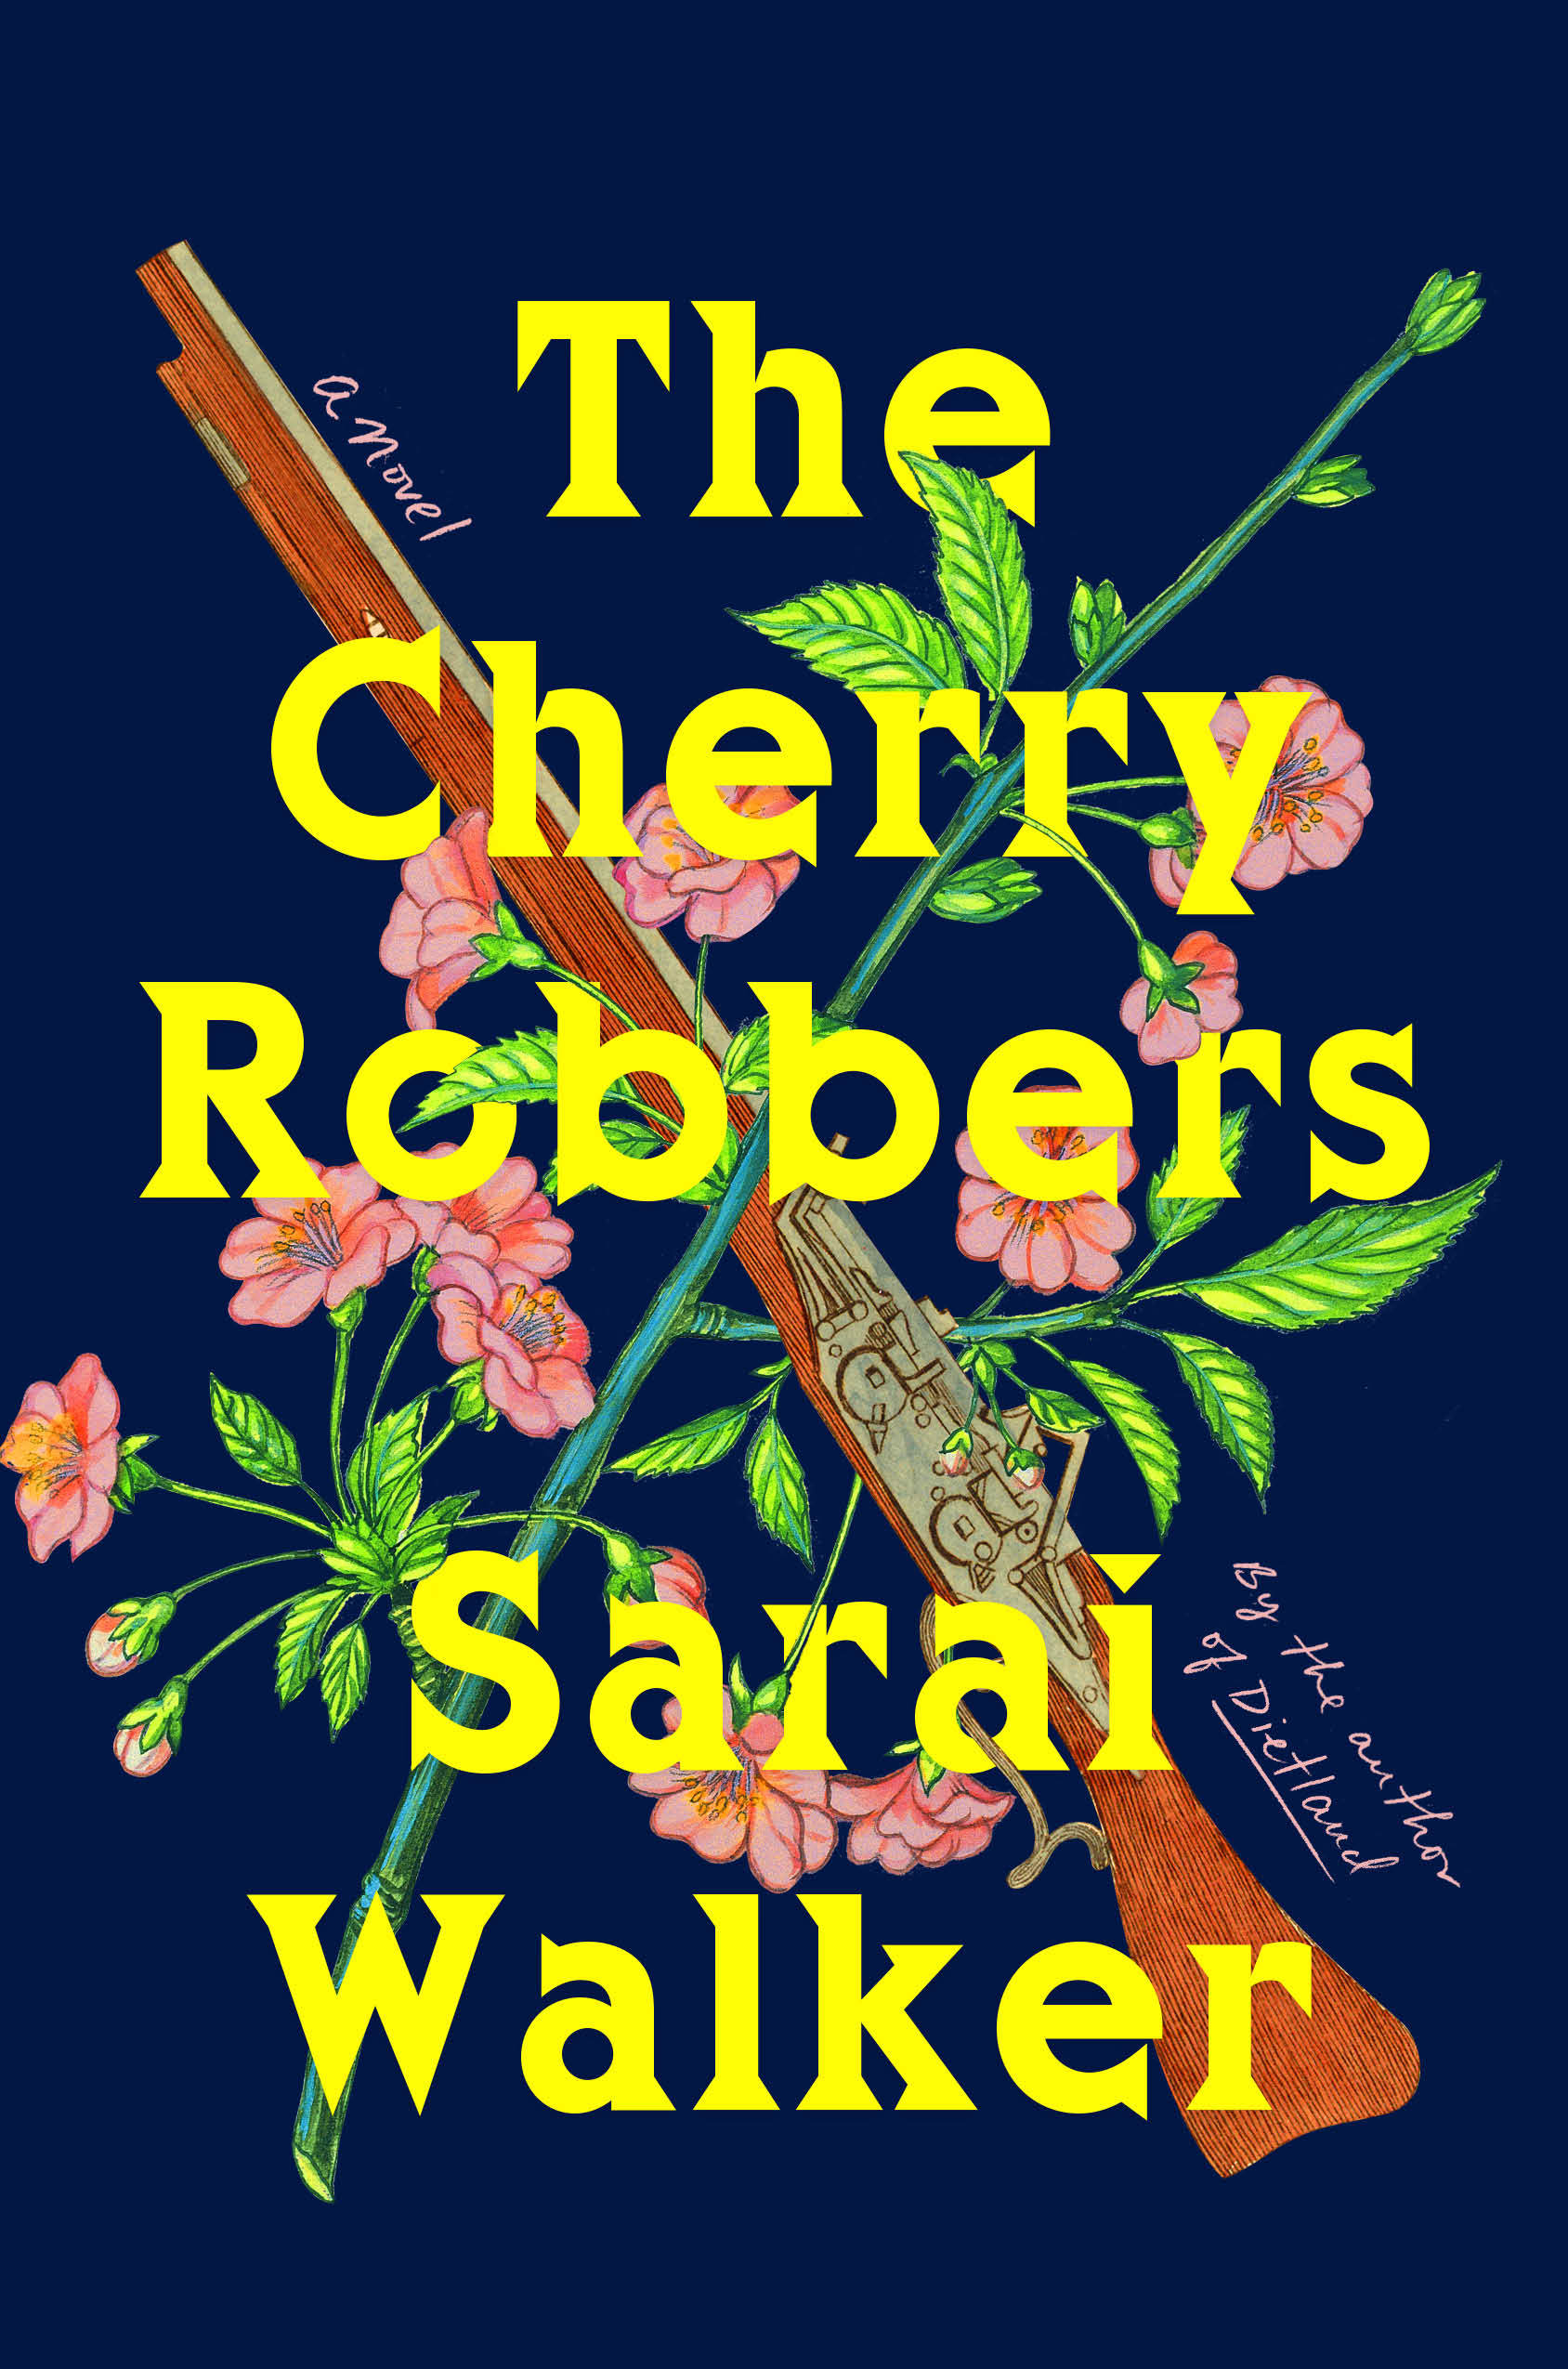 The Cherry Robbers by Sarai Walker PDF Download